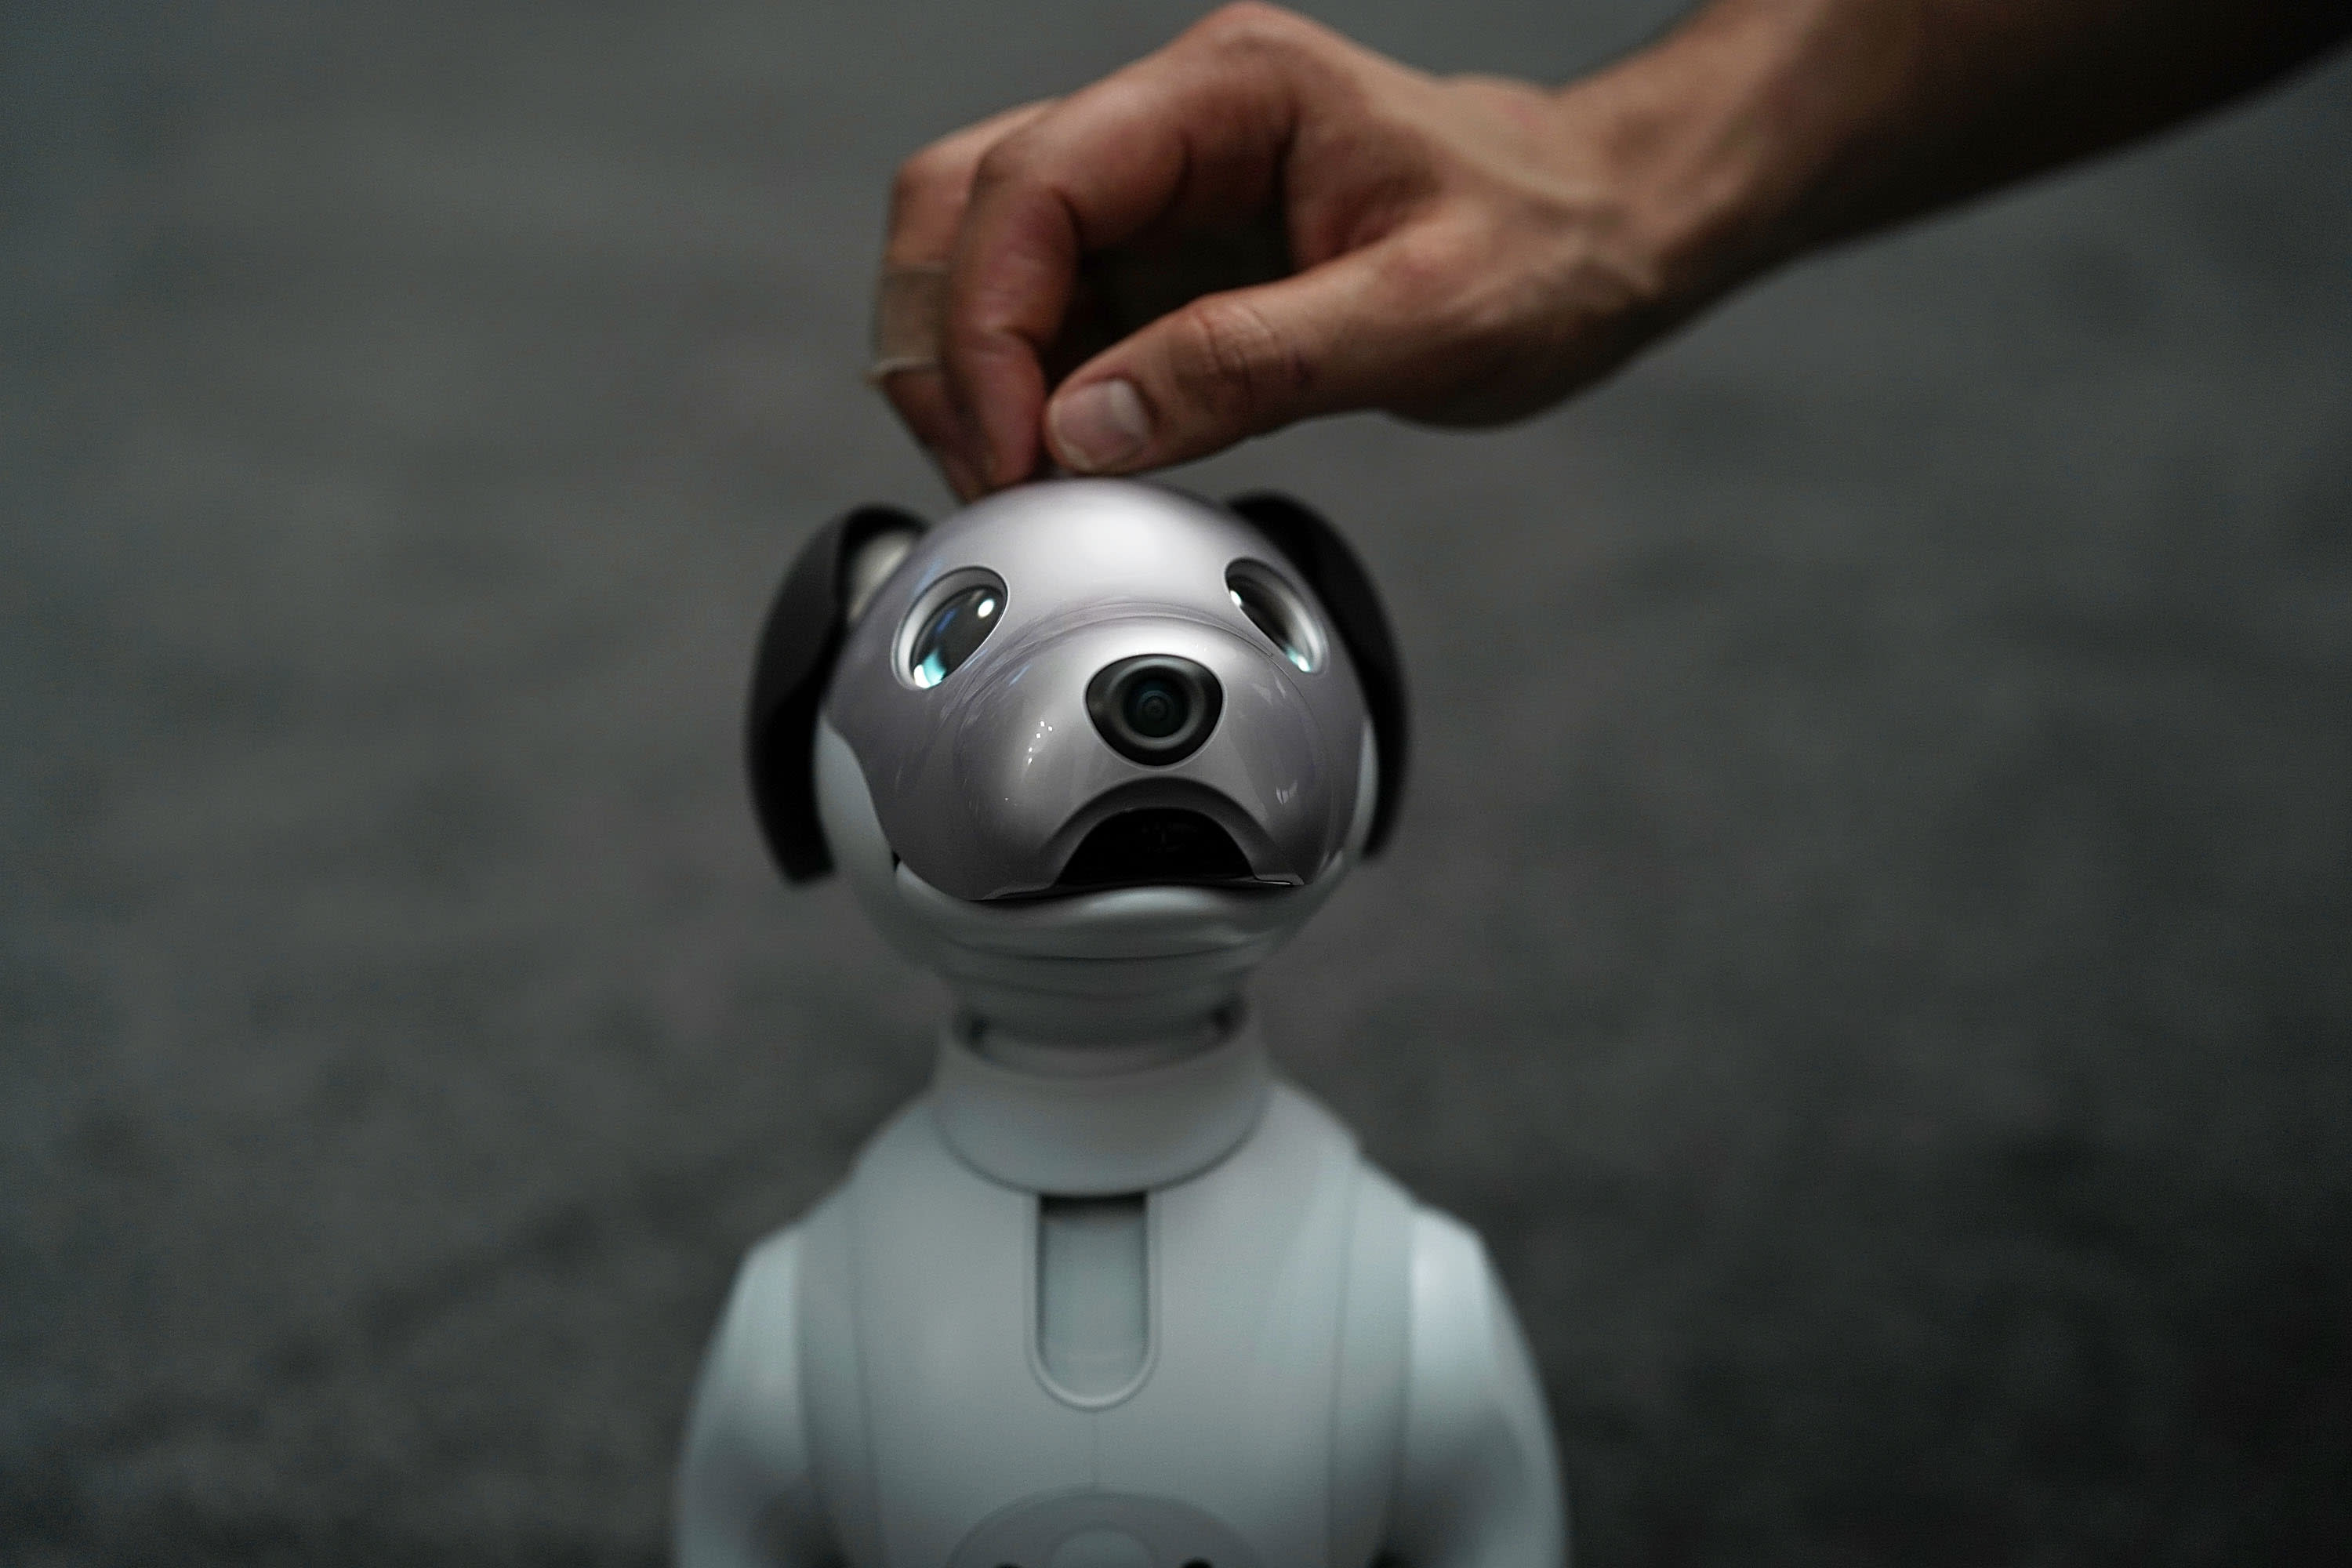 The latest generation of the Sony robotic pet, Aibo, is on display during a press event for CES 2018